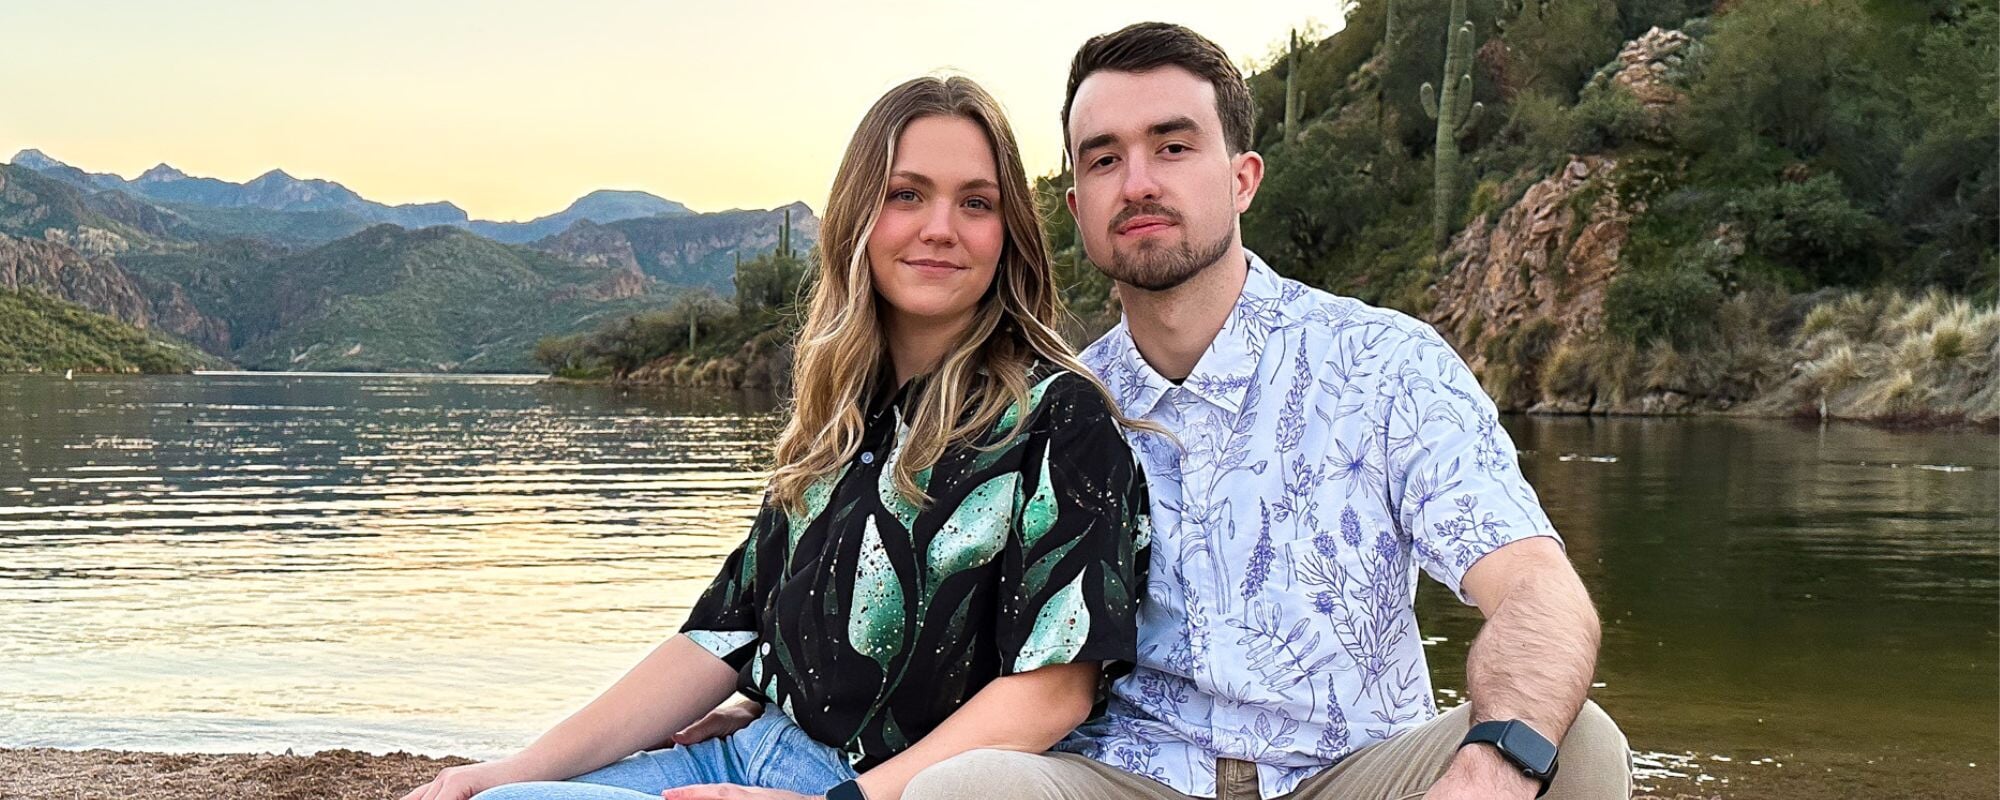 A couple sitting by a lake, both wearing stylish bontany button up shirts with botanical and plant prints. The man is wearing a white Hawaiian shirt with subtle leaves, while the woman is wearing a black botany shirt with green leaves.